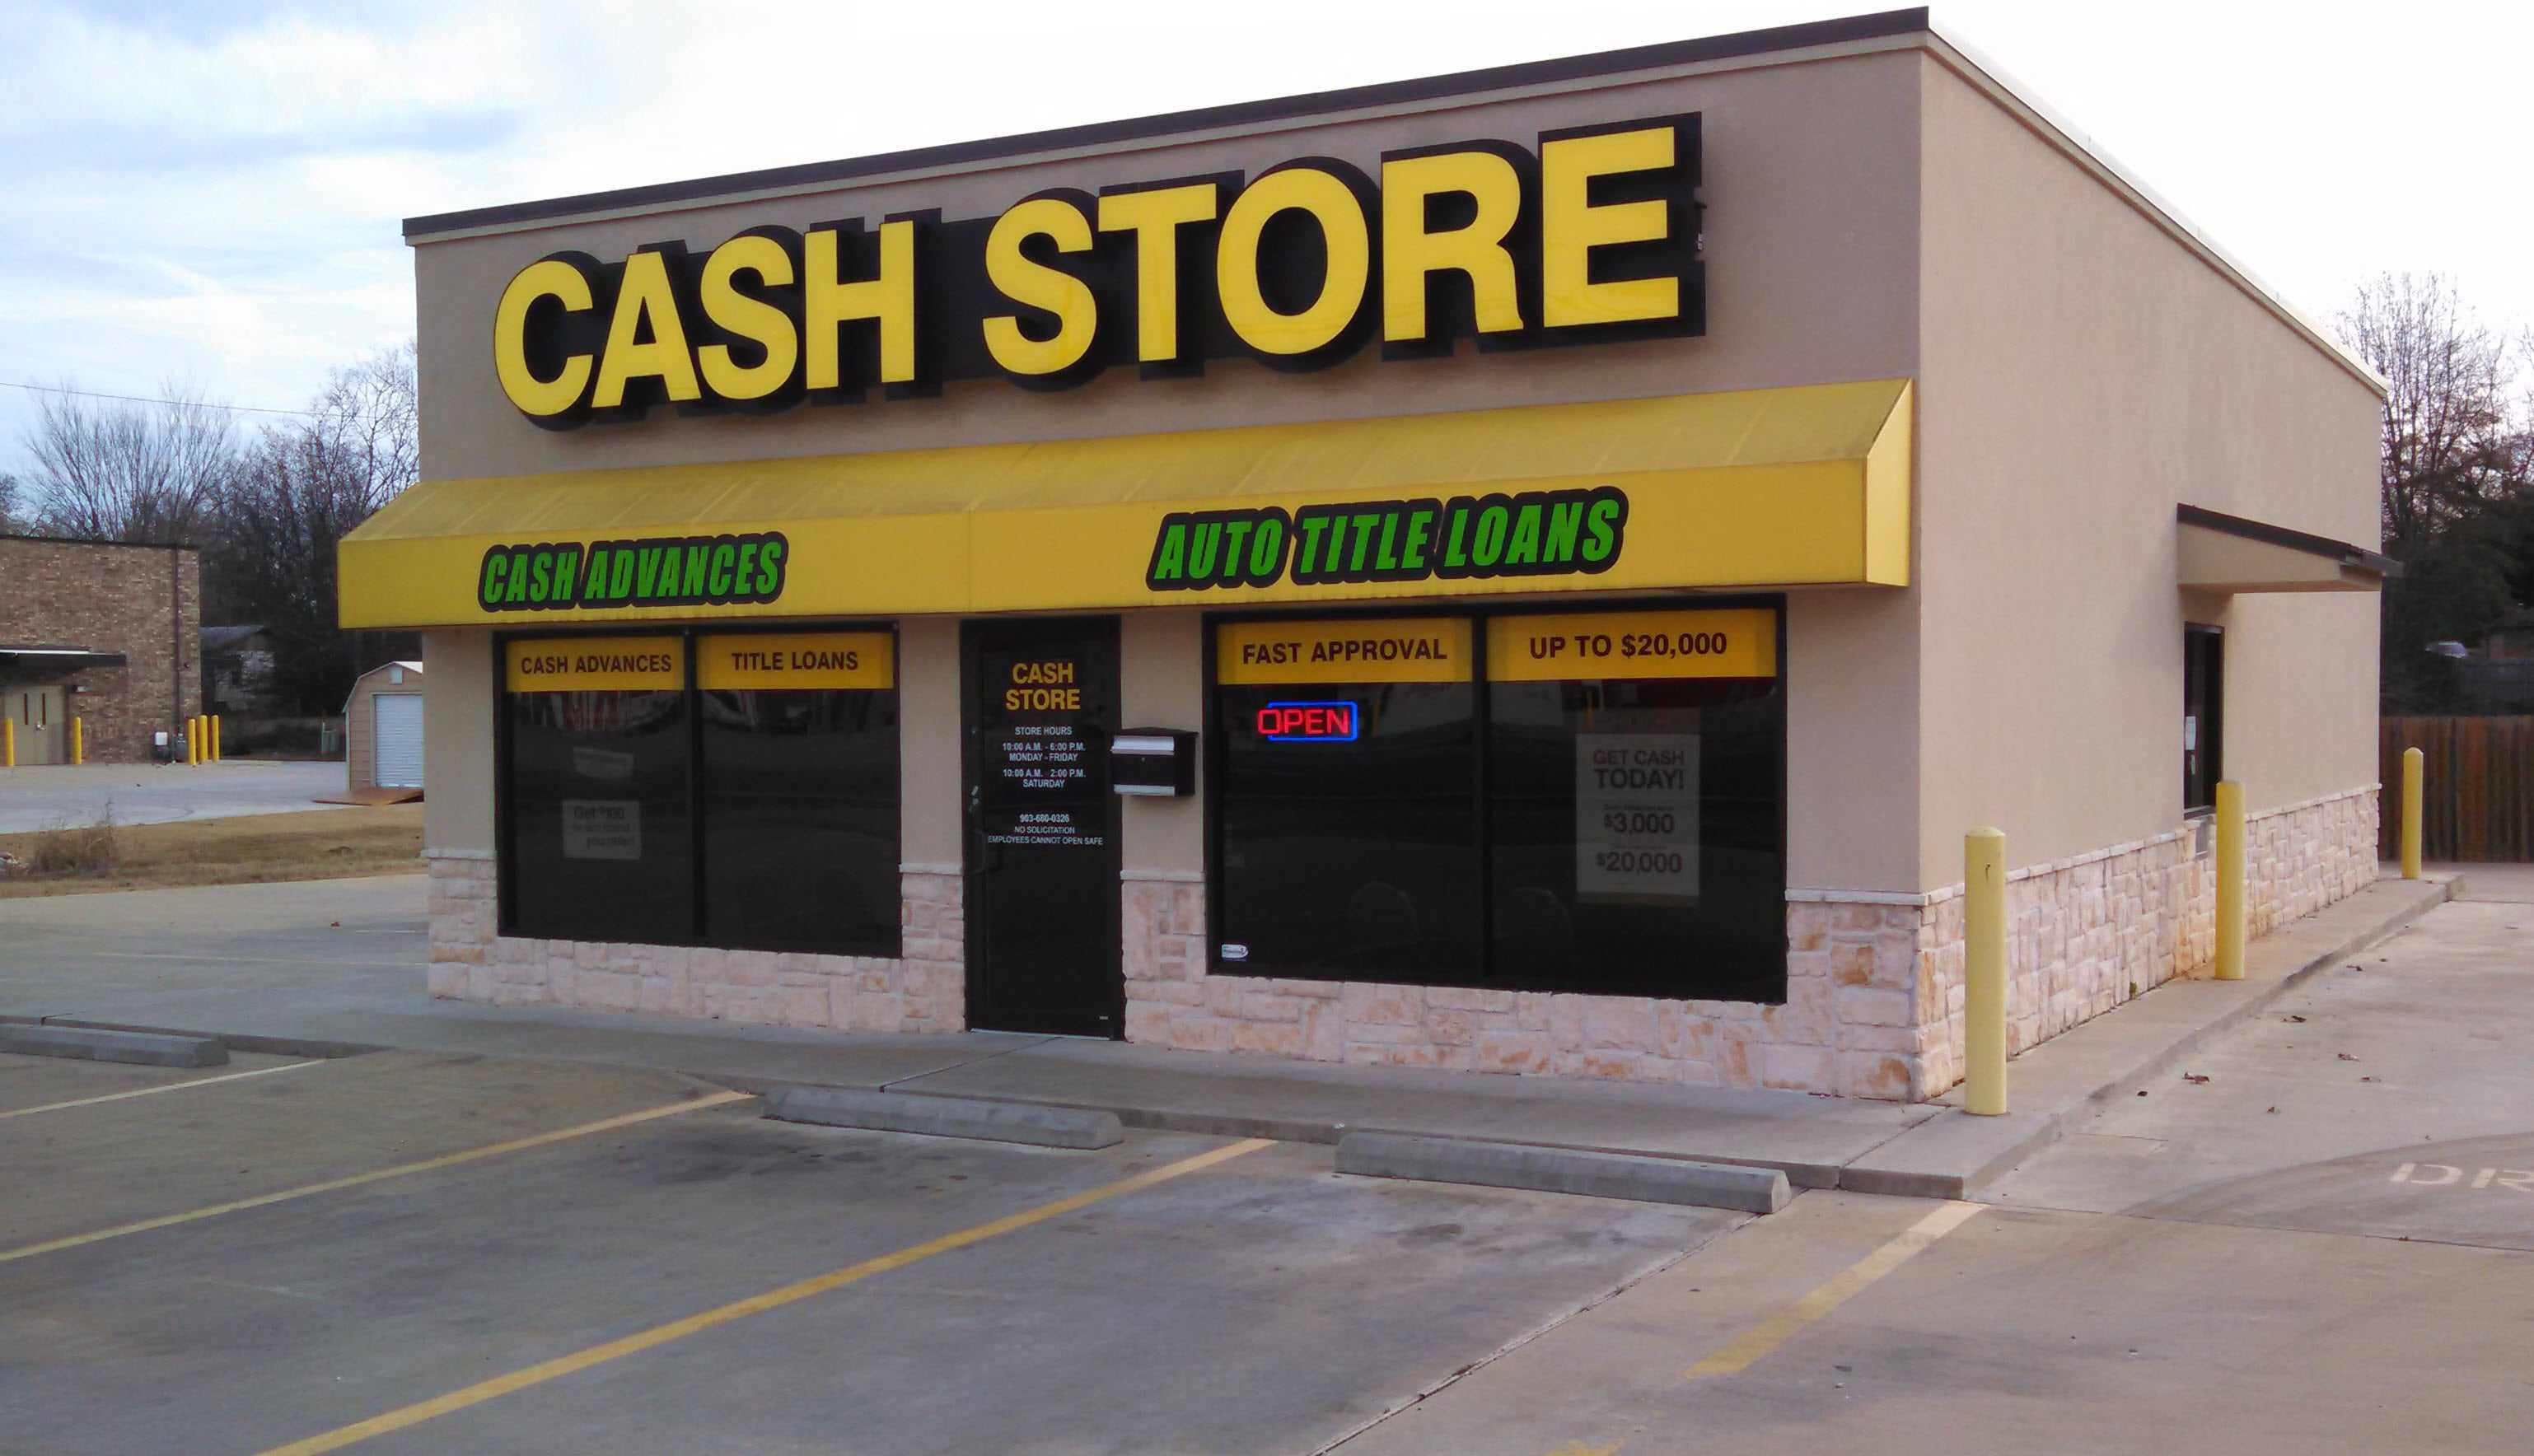 The Cash Store -  #7508